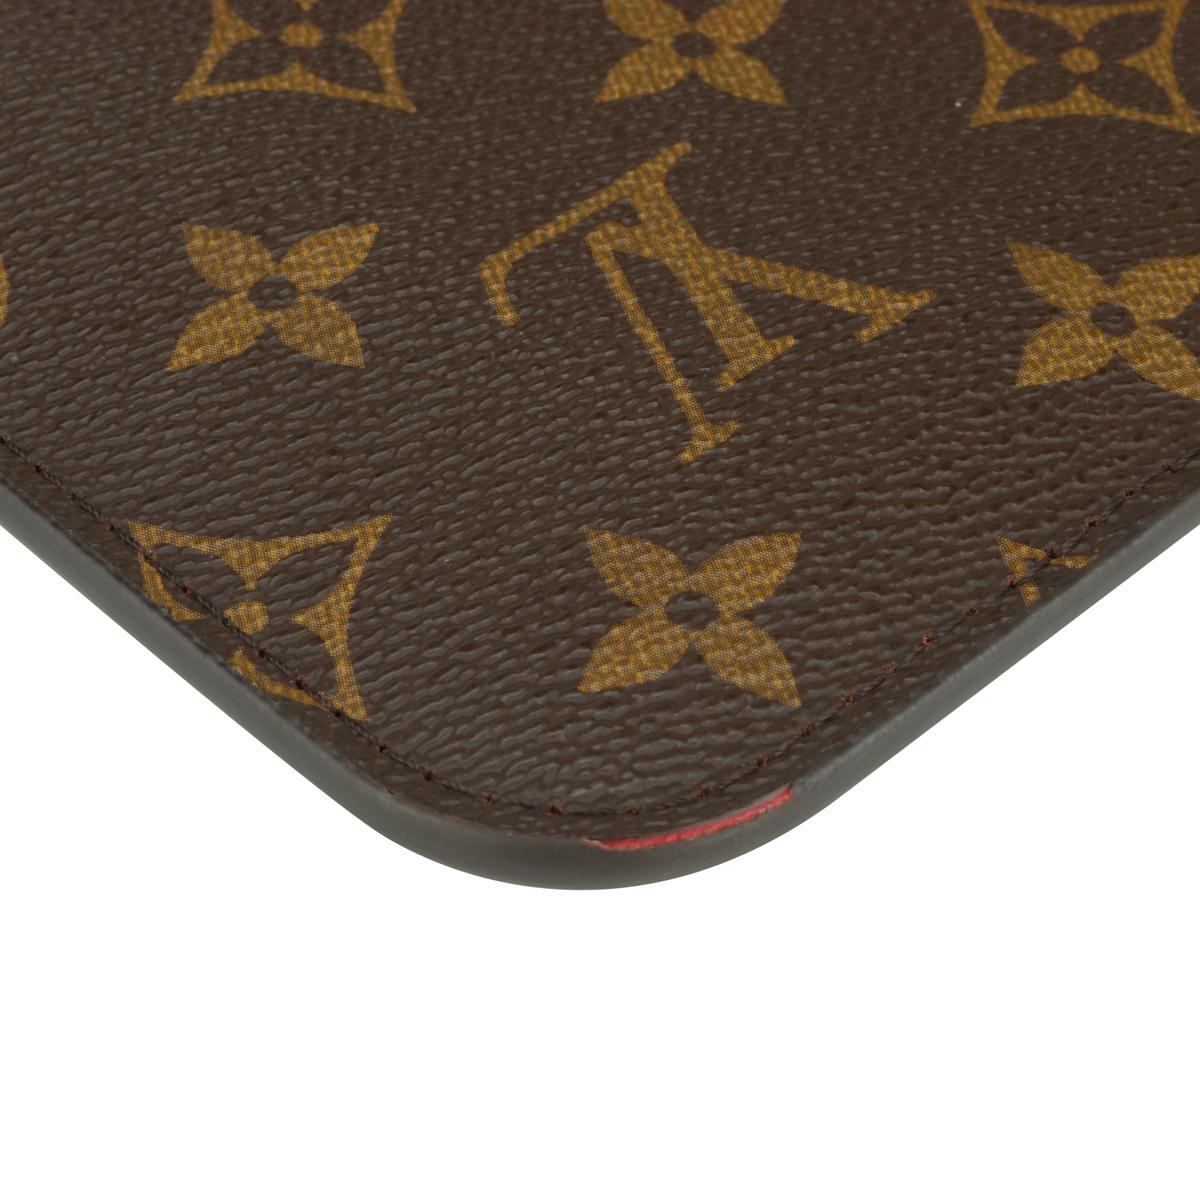 Louis Vuitton Neverfull MM Pochette Pouch in Monogram with Red Interior 2019 4